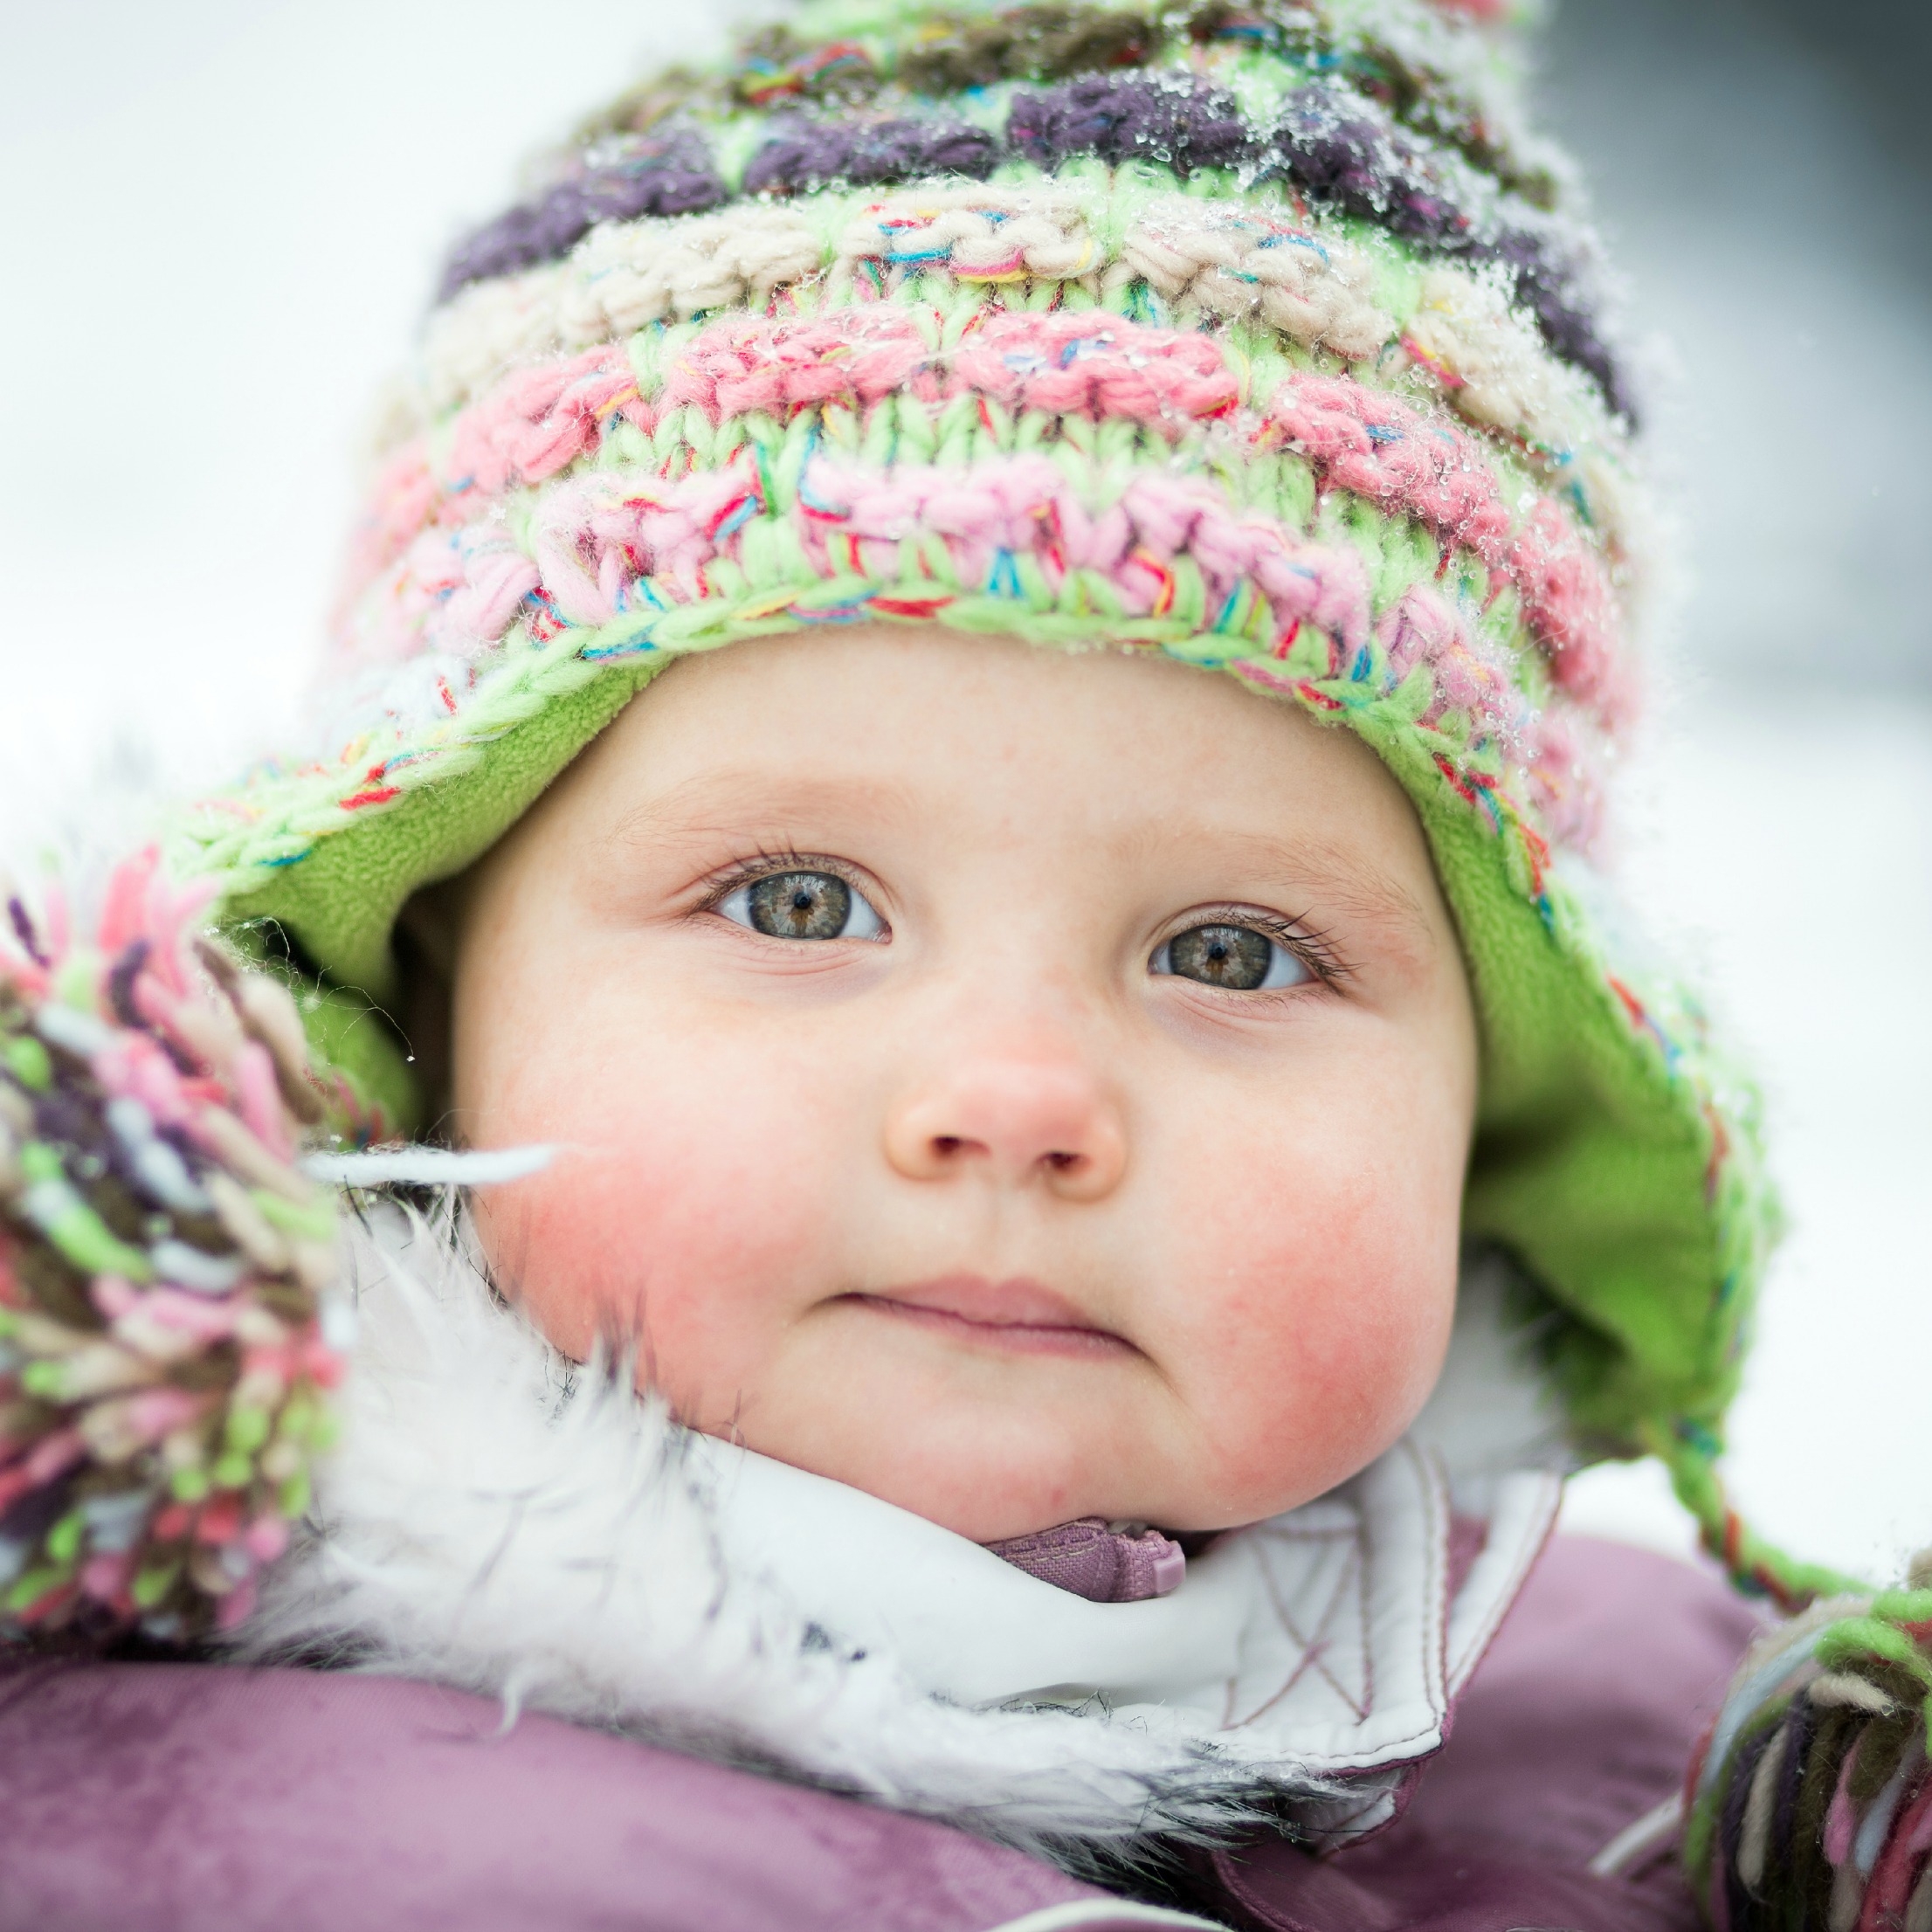 How to Survive Winter With an Infant